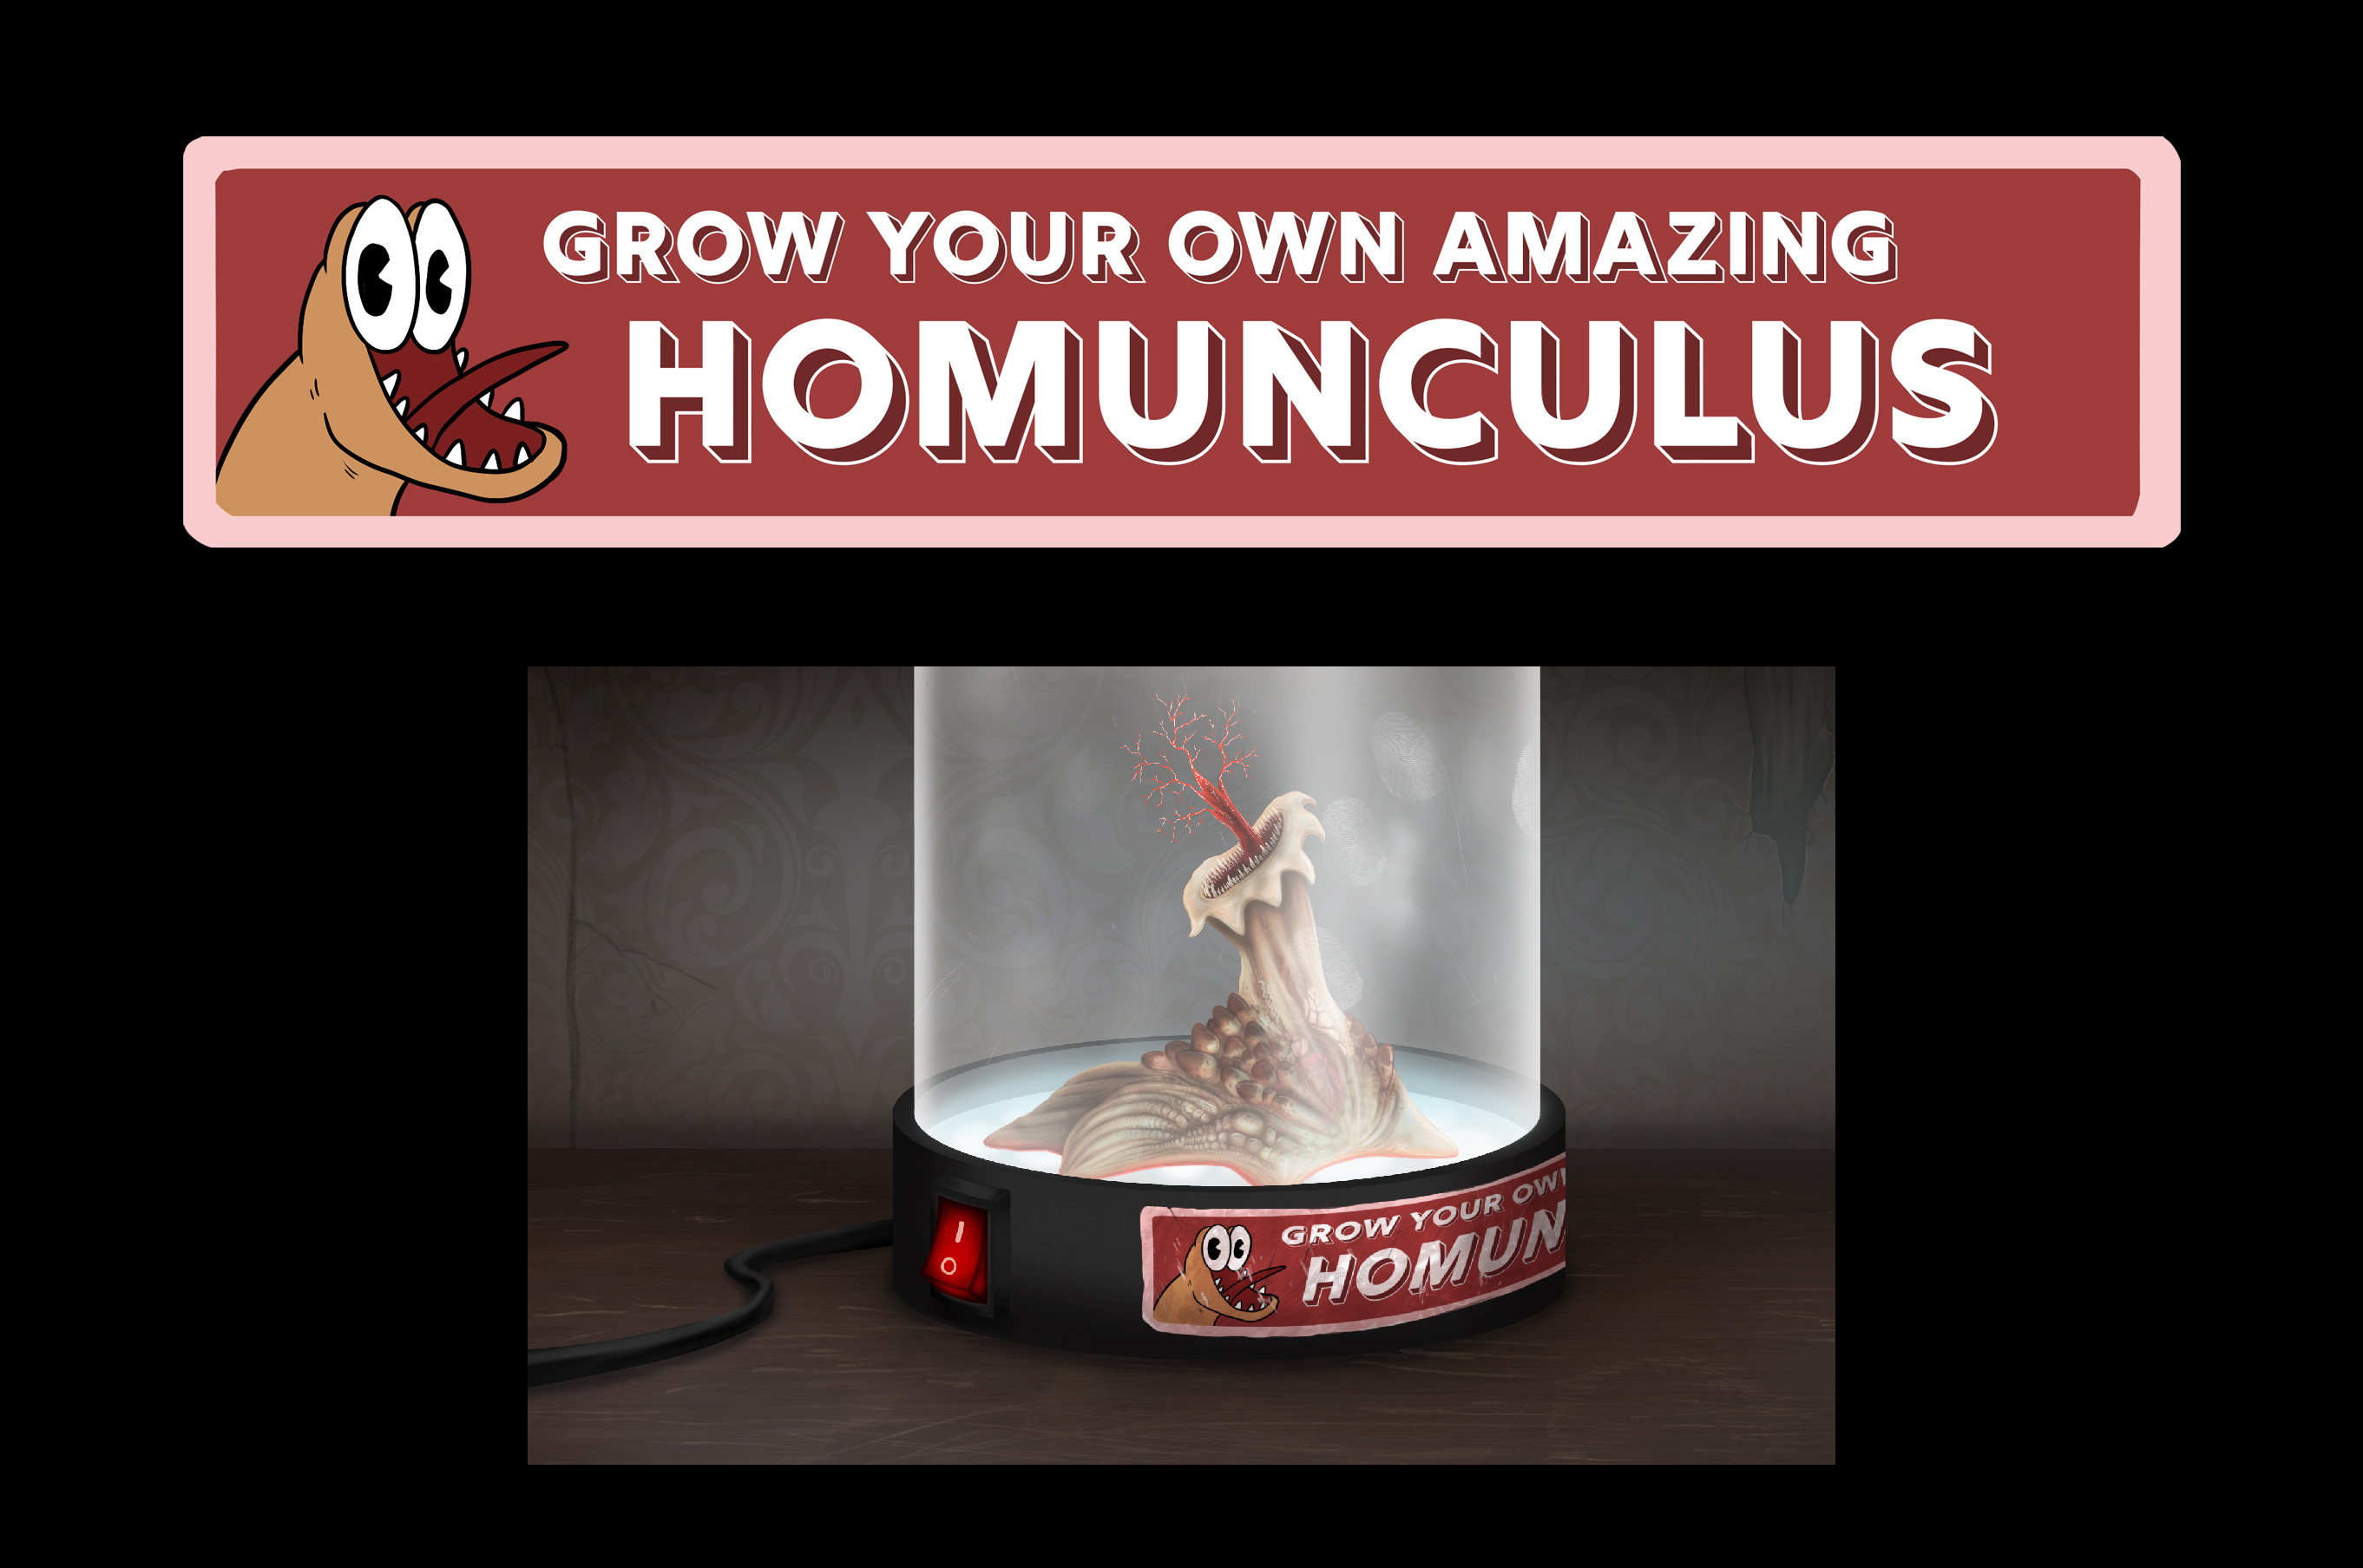 Label design I made for my Grow Your Own Homunculus project.